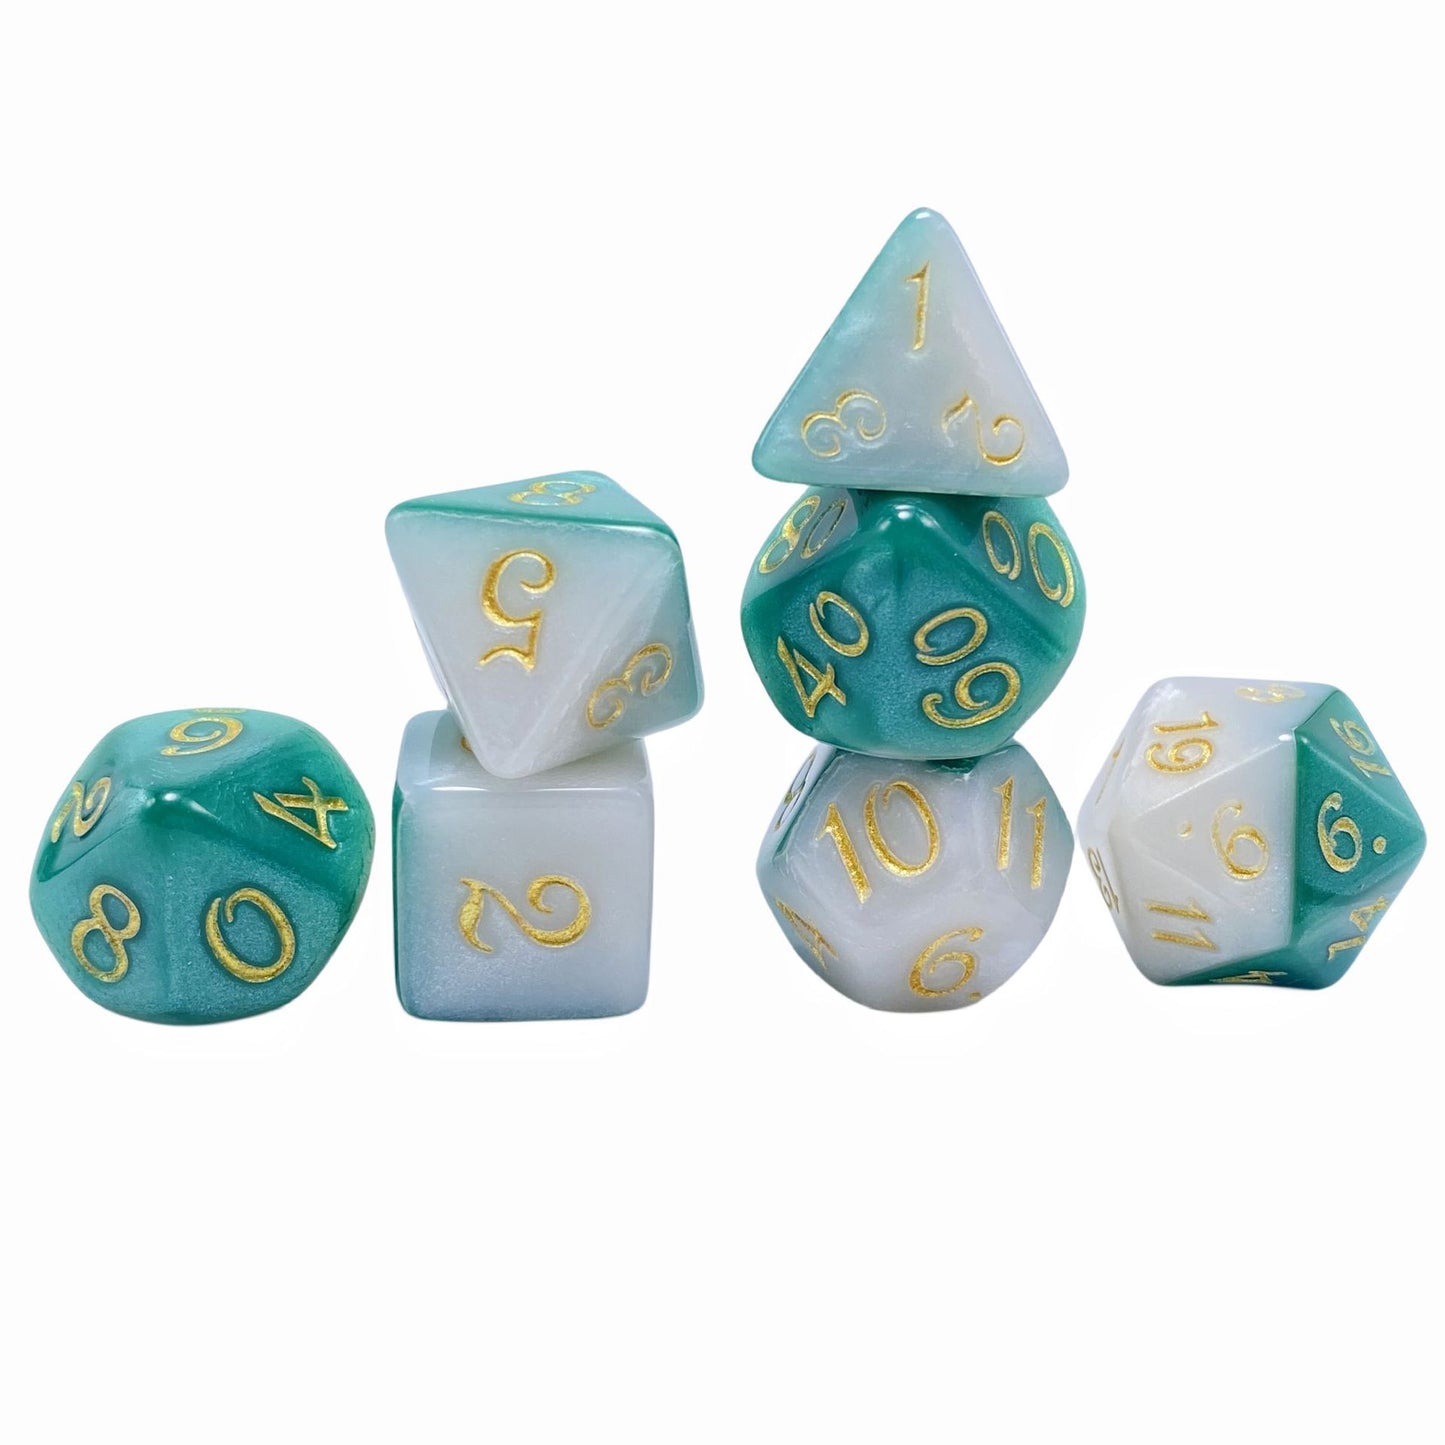 FREE Today: Green And Cream  Polyhedral Dice Set